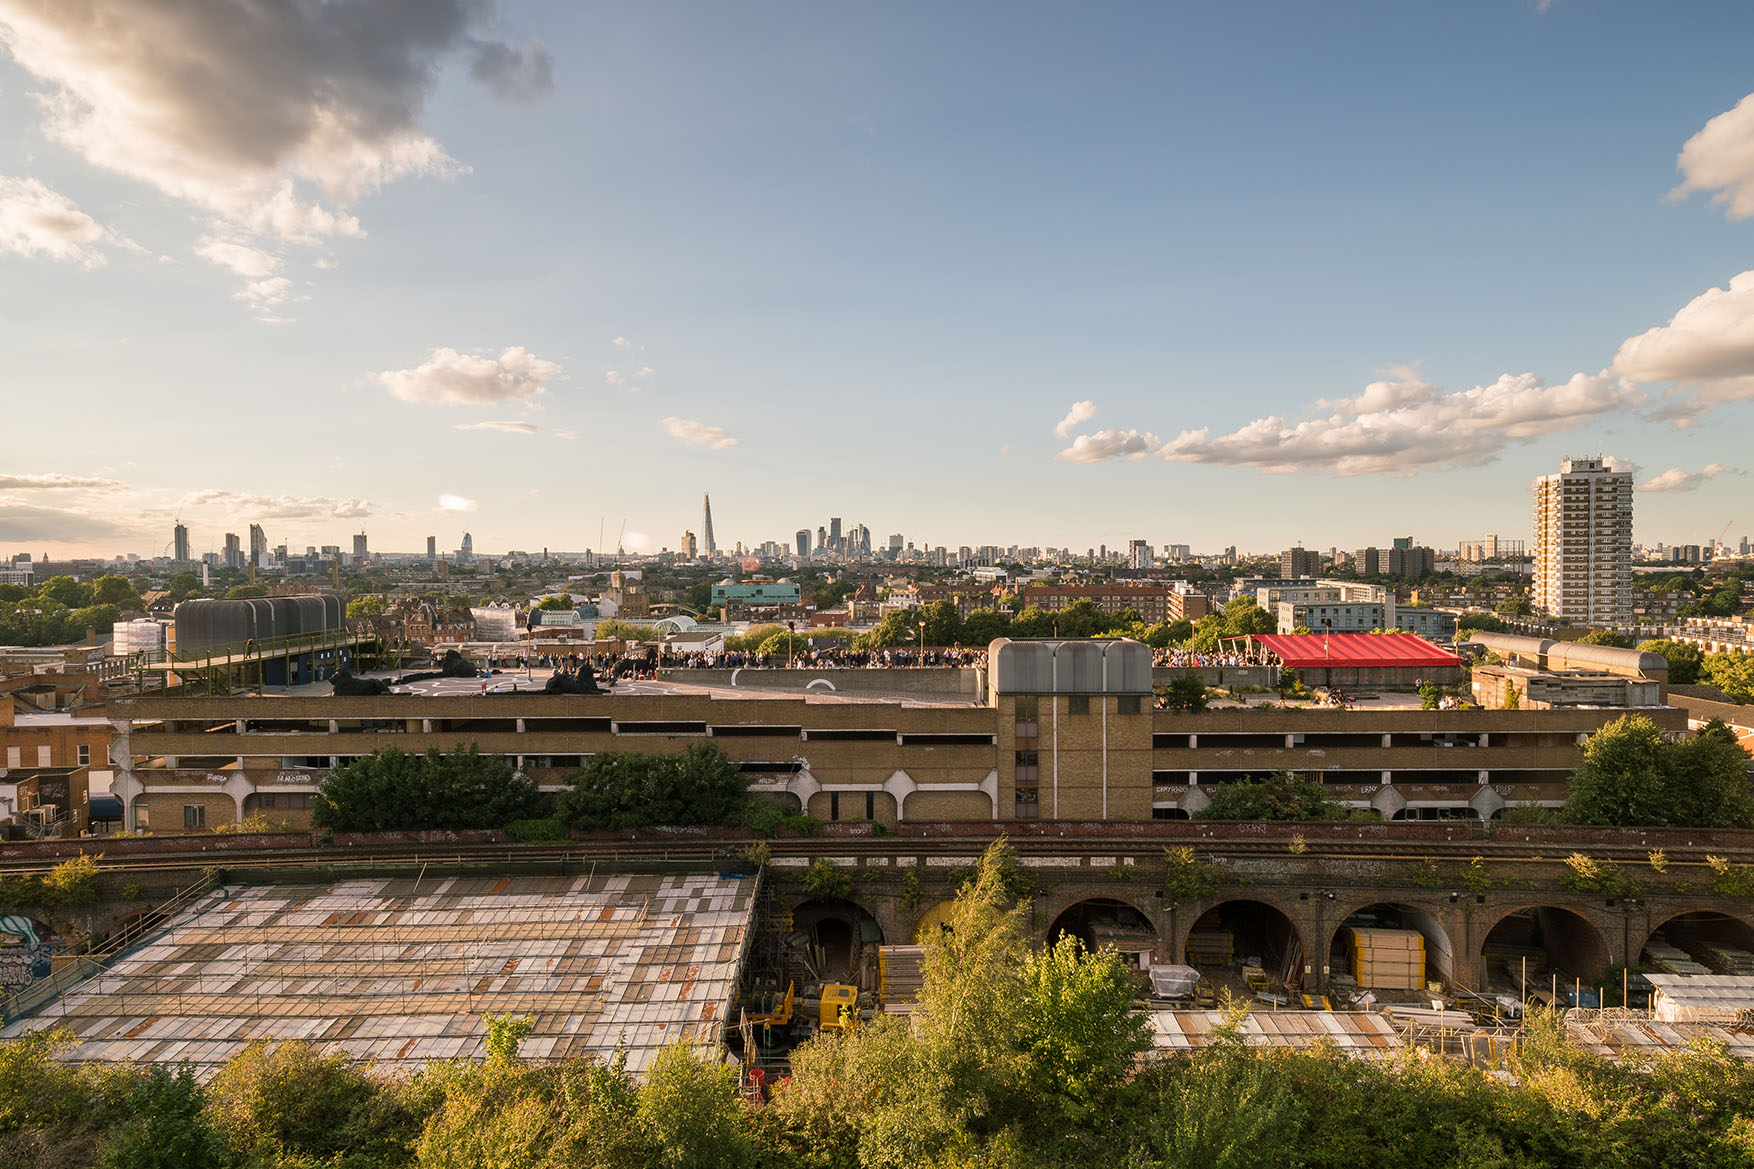 ID: A wide angle view taken from a great height looks out toward the side profile of a brutalist multi-storey car park. On the rooftop there are people walking around and large artworks. Beyond the rooftop you can see the full London skyline set against clear blue skies.